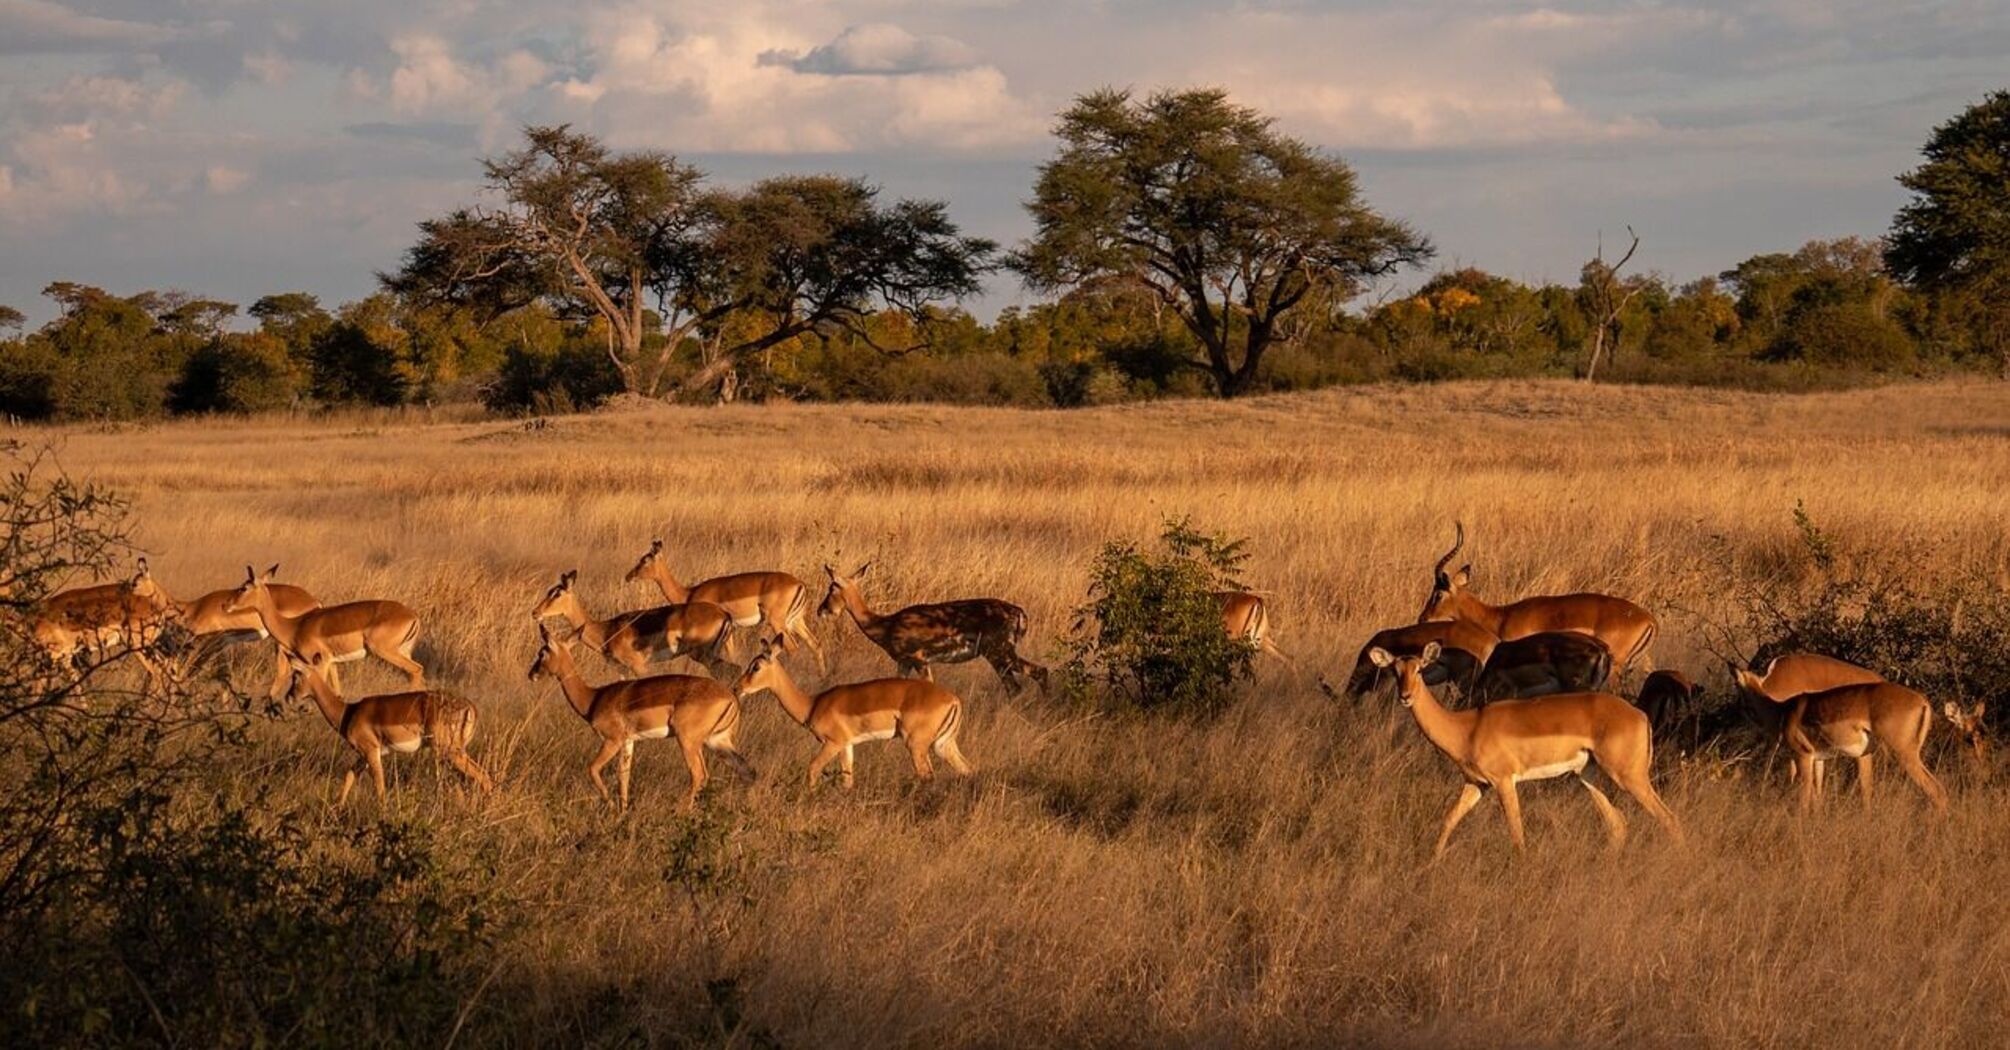 Travel to Zimbabwe: what two UNESCO World Heritage Sites can be found here